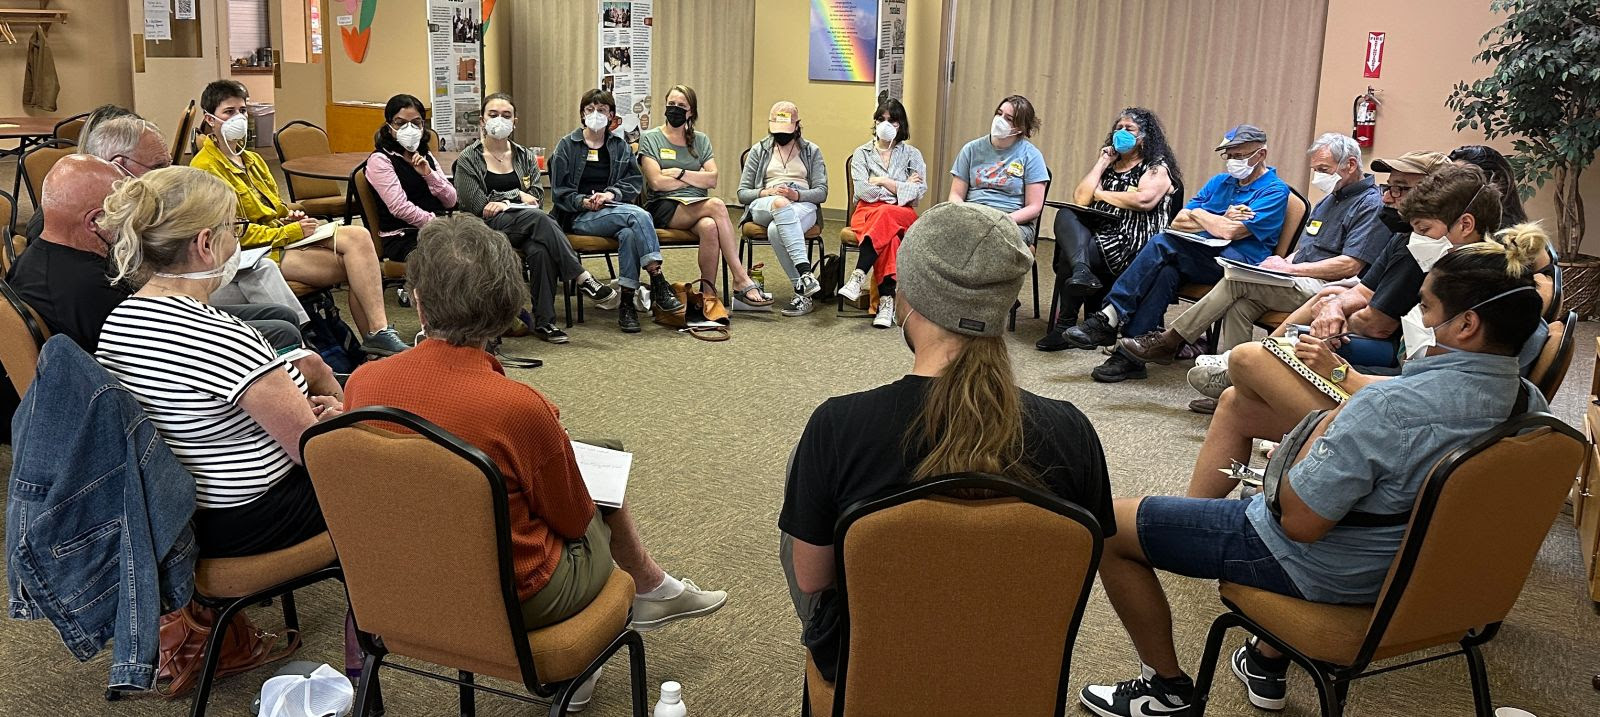 Around 20 people sit in a circle with masks on, mid-discussion.